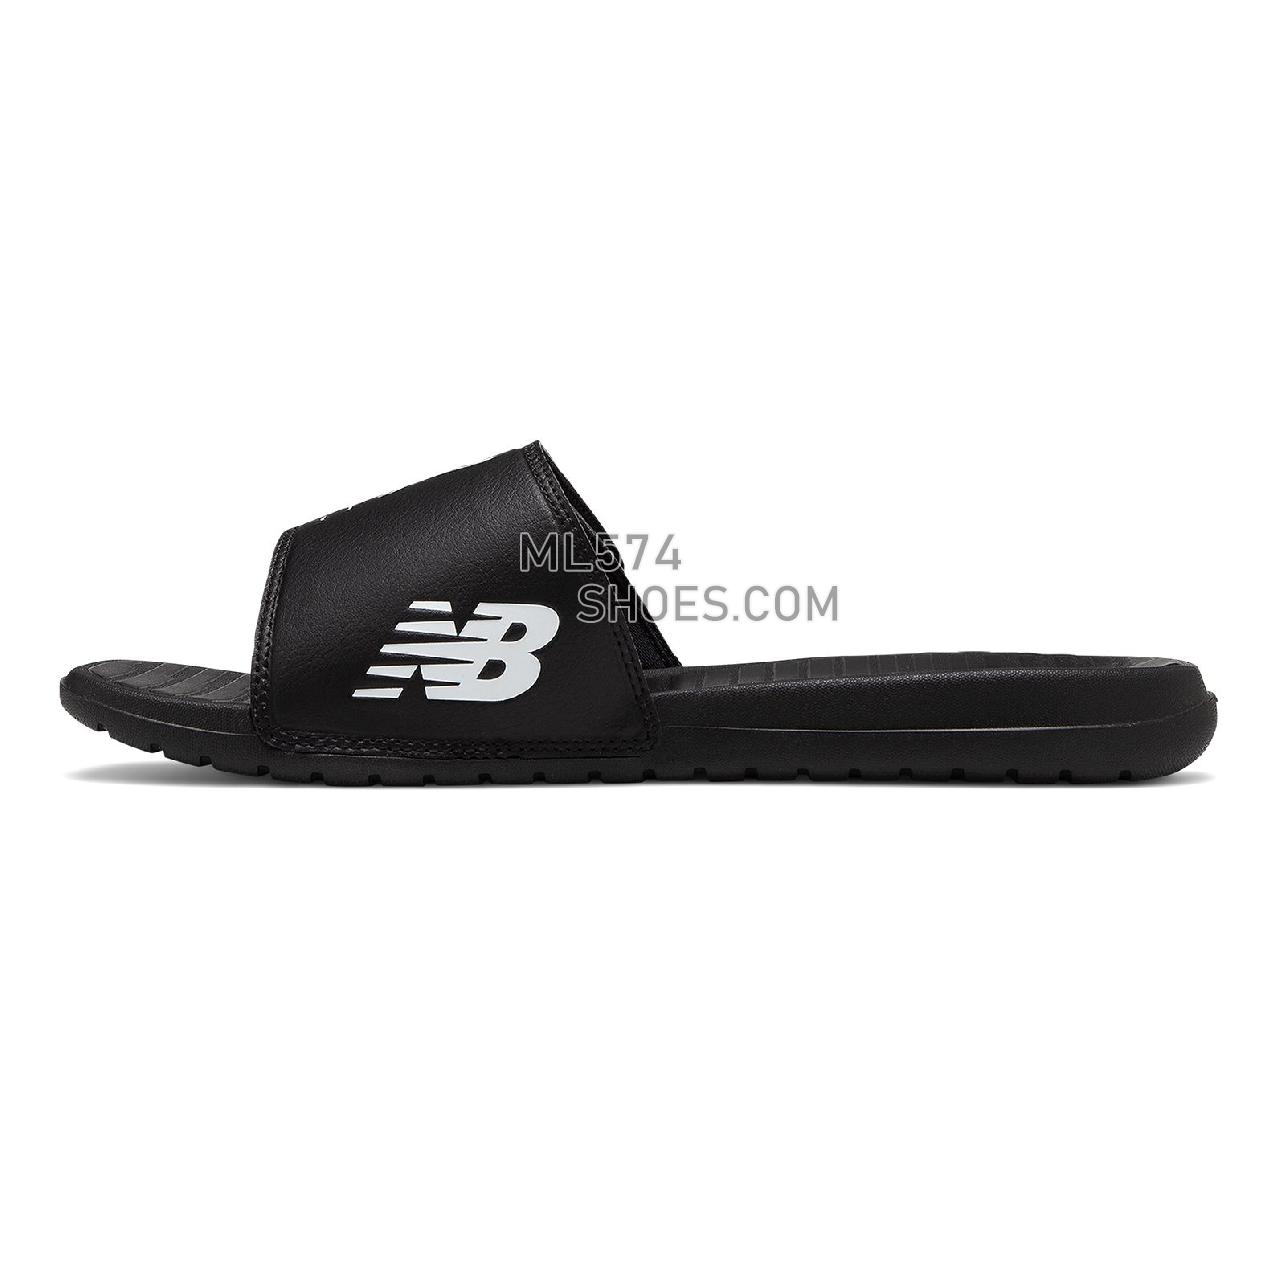 New Balance LFC Recovery Slide - Men's 230 - Sandals Black with White - SDL230BW